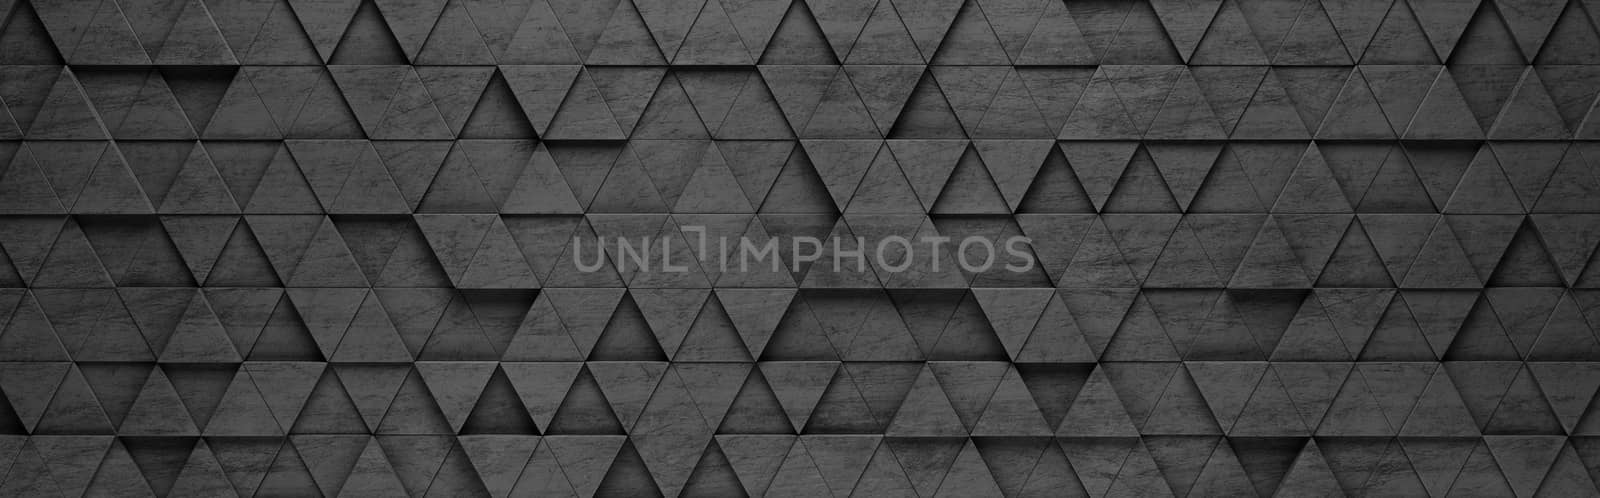 Wall of Black Triangles Tiles Arranged in Random Height 3D Pattern Background Illustration